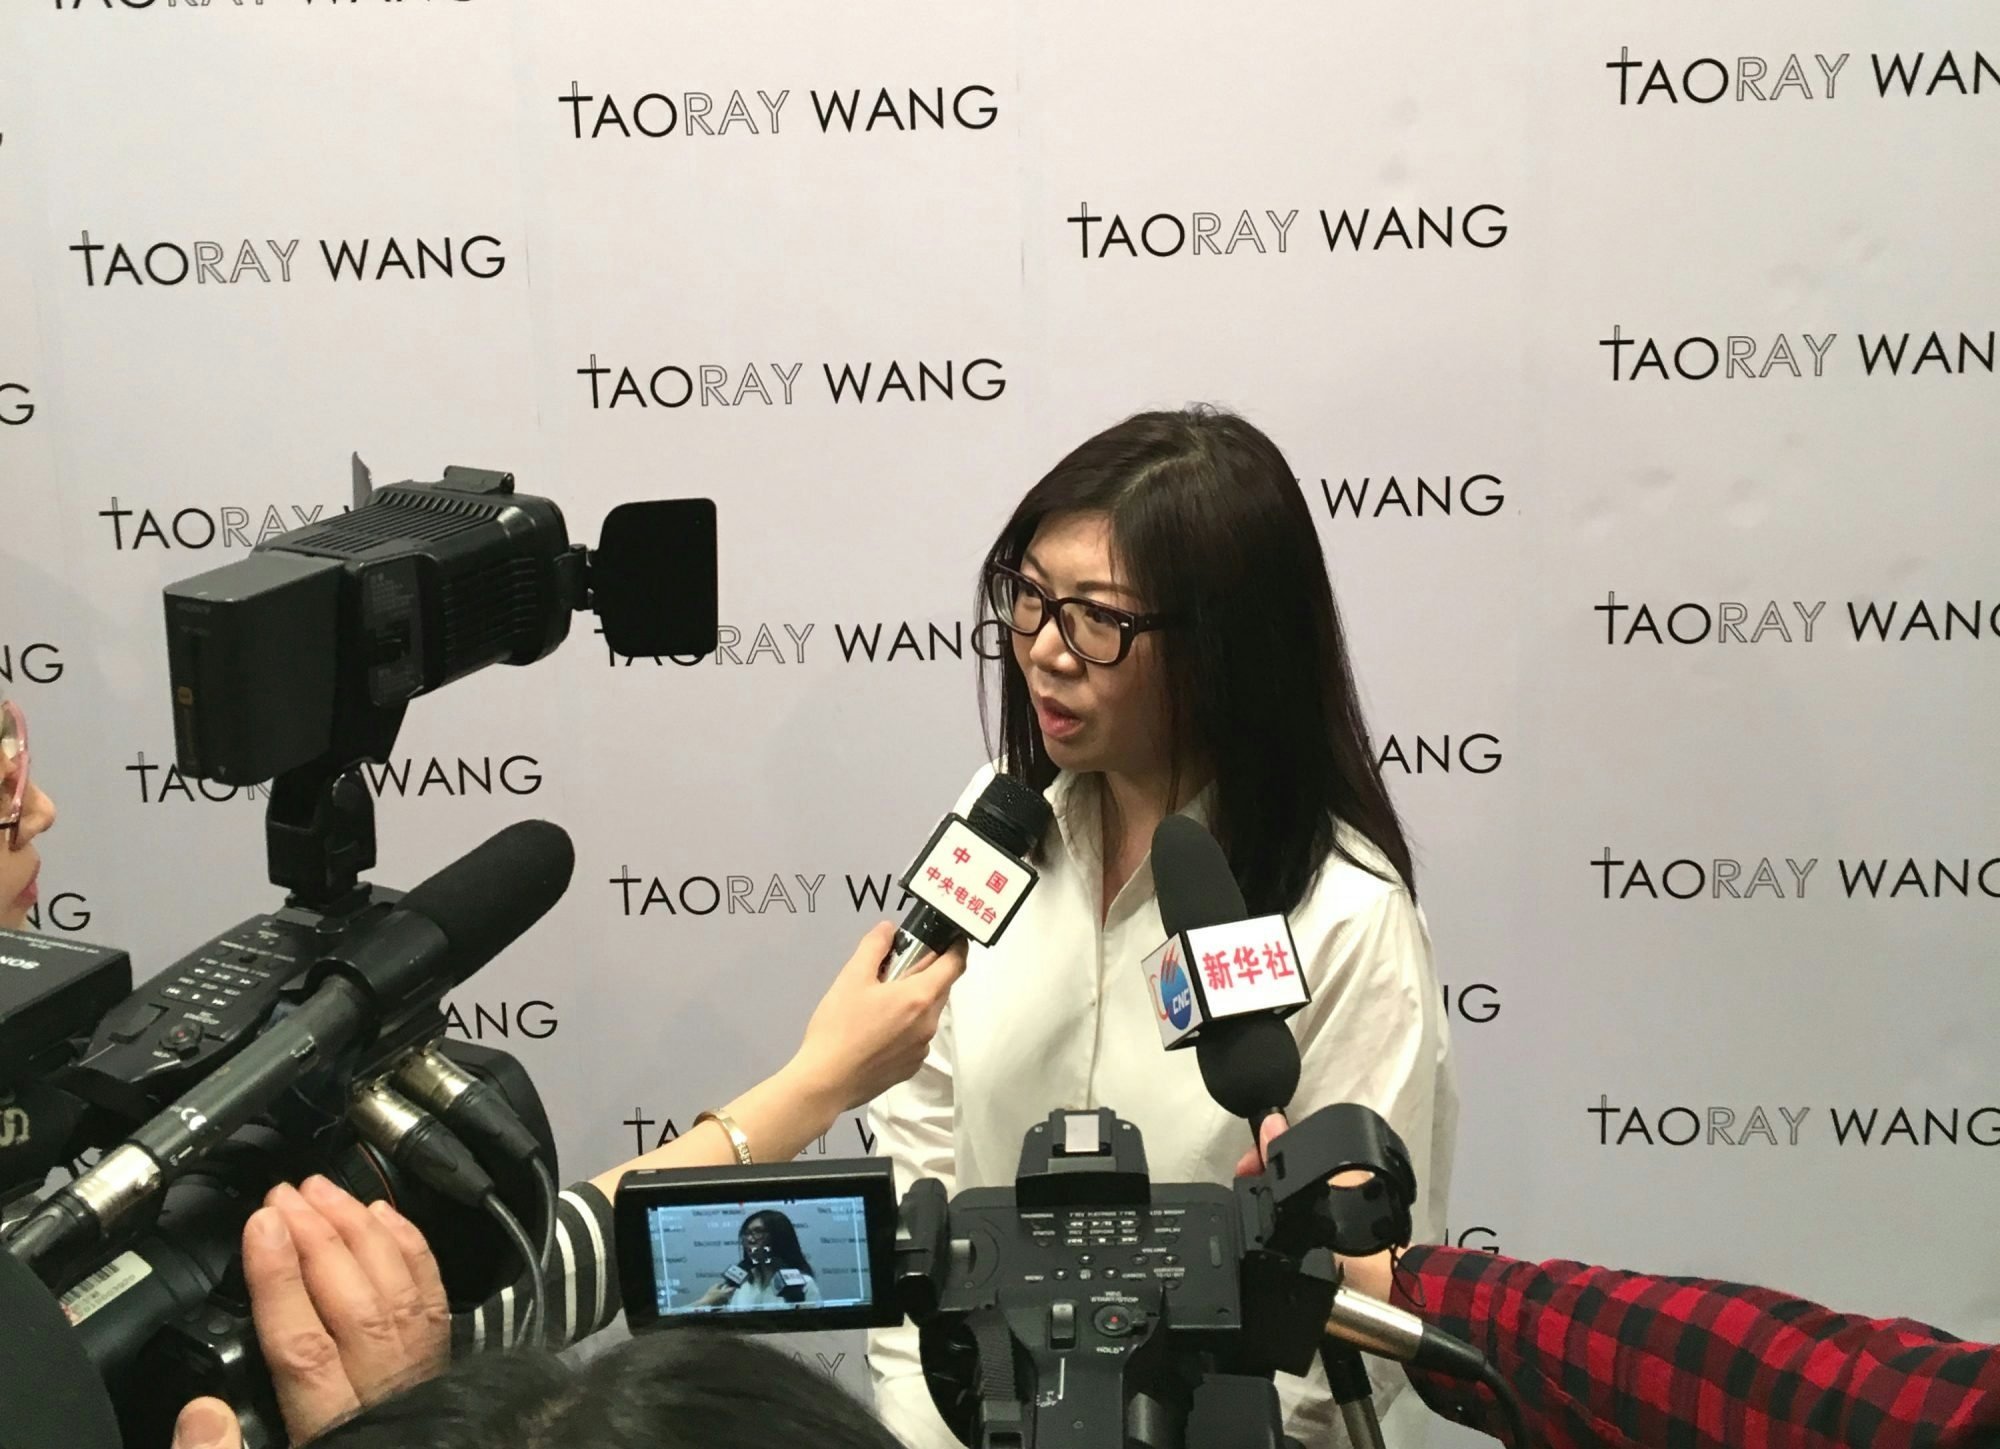 Tao Wang, the designer behind Taoray Wang, takes questions from media after her Fall/Winter 2017 collection debut at New York Fashion Week. (Philip Zhang)